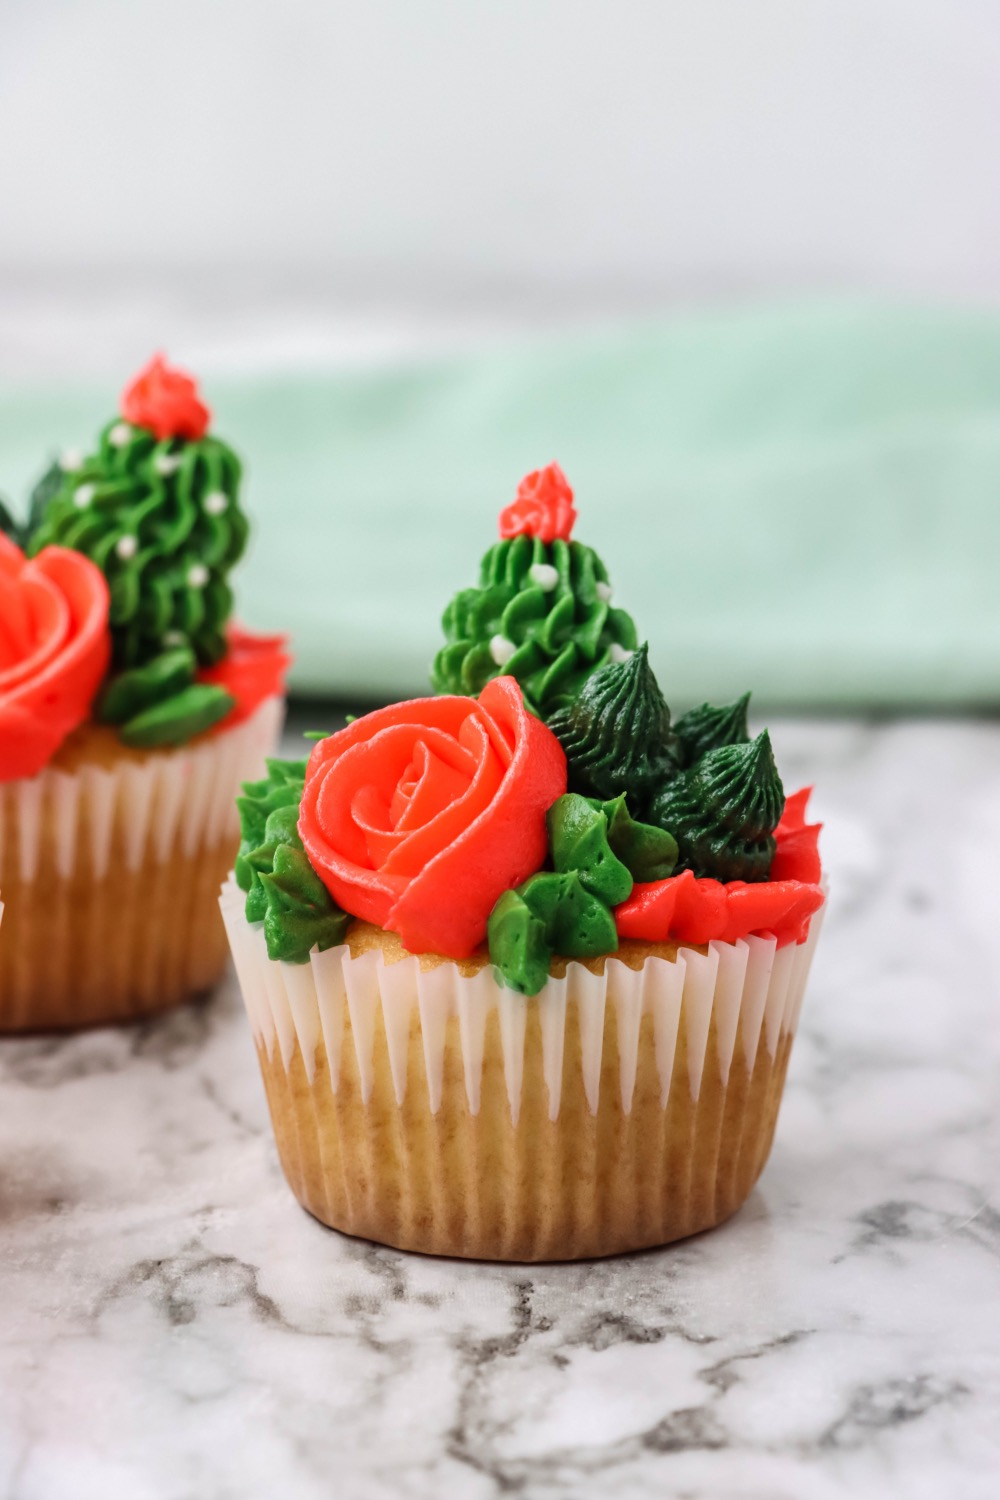 how to make cactus frosting for cupcakes pop shop america